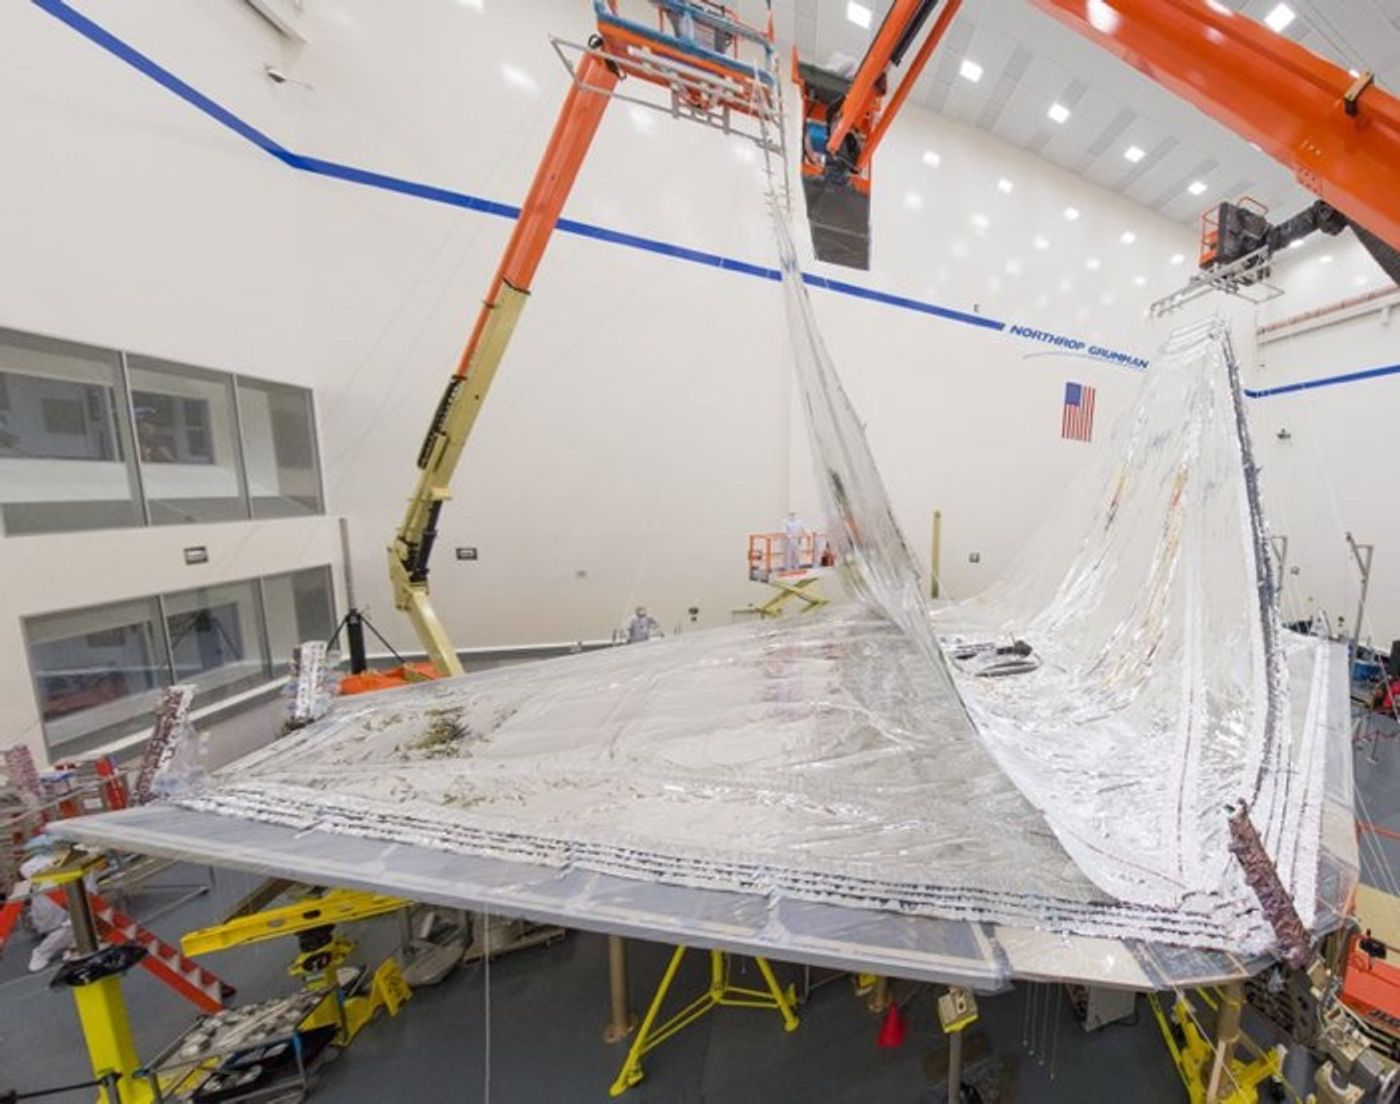 The James Webb Space Telescope's sunshield is being rolled up and tested ahead of its launch in 2018-2019.